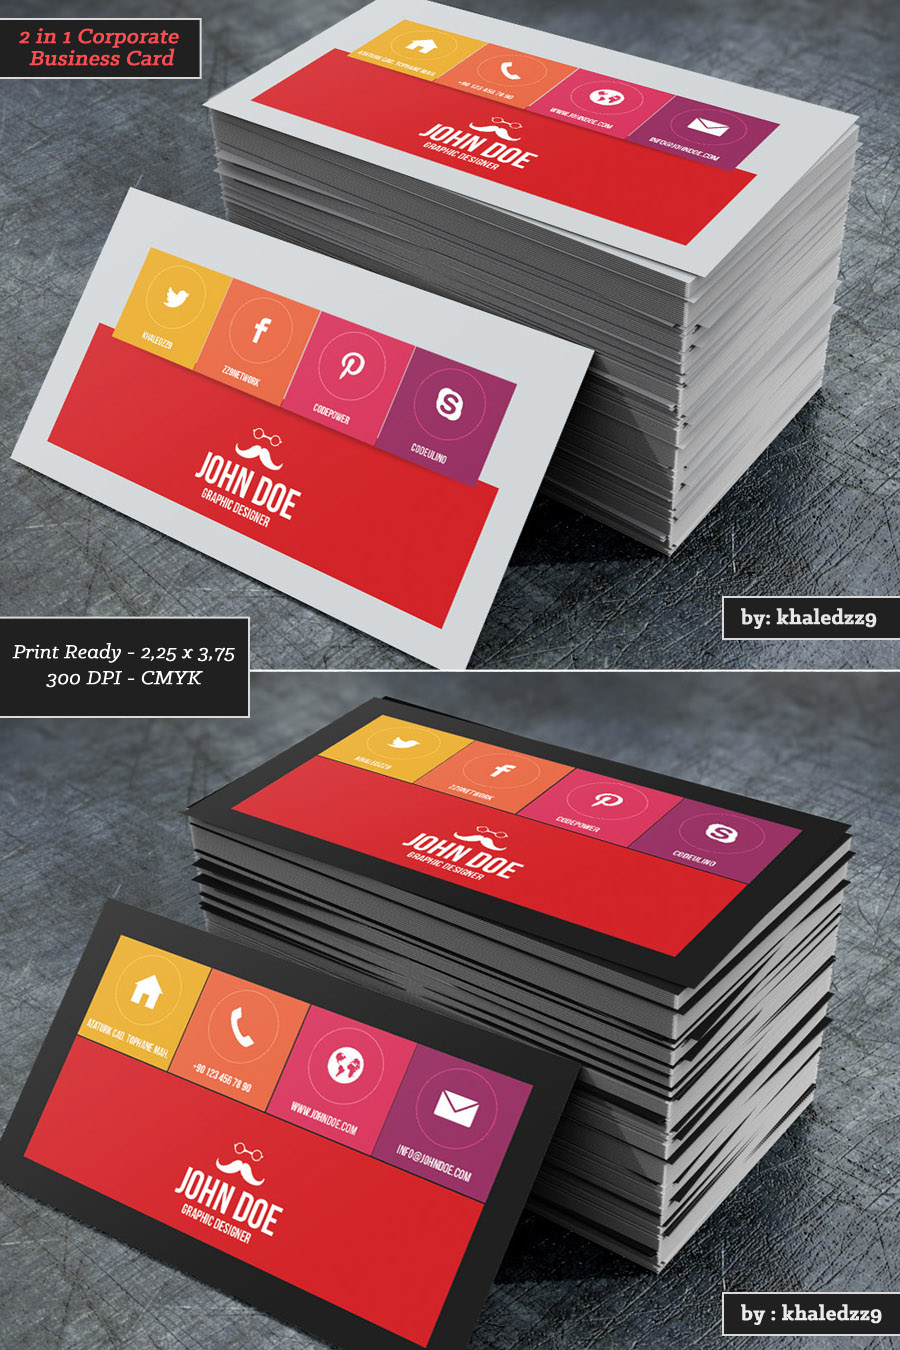 2 in 1 Corporate Business Card